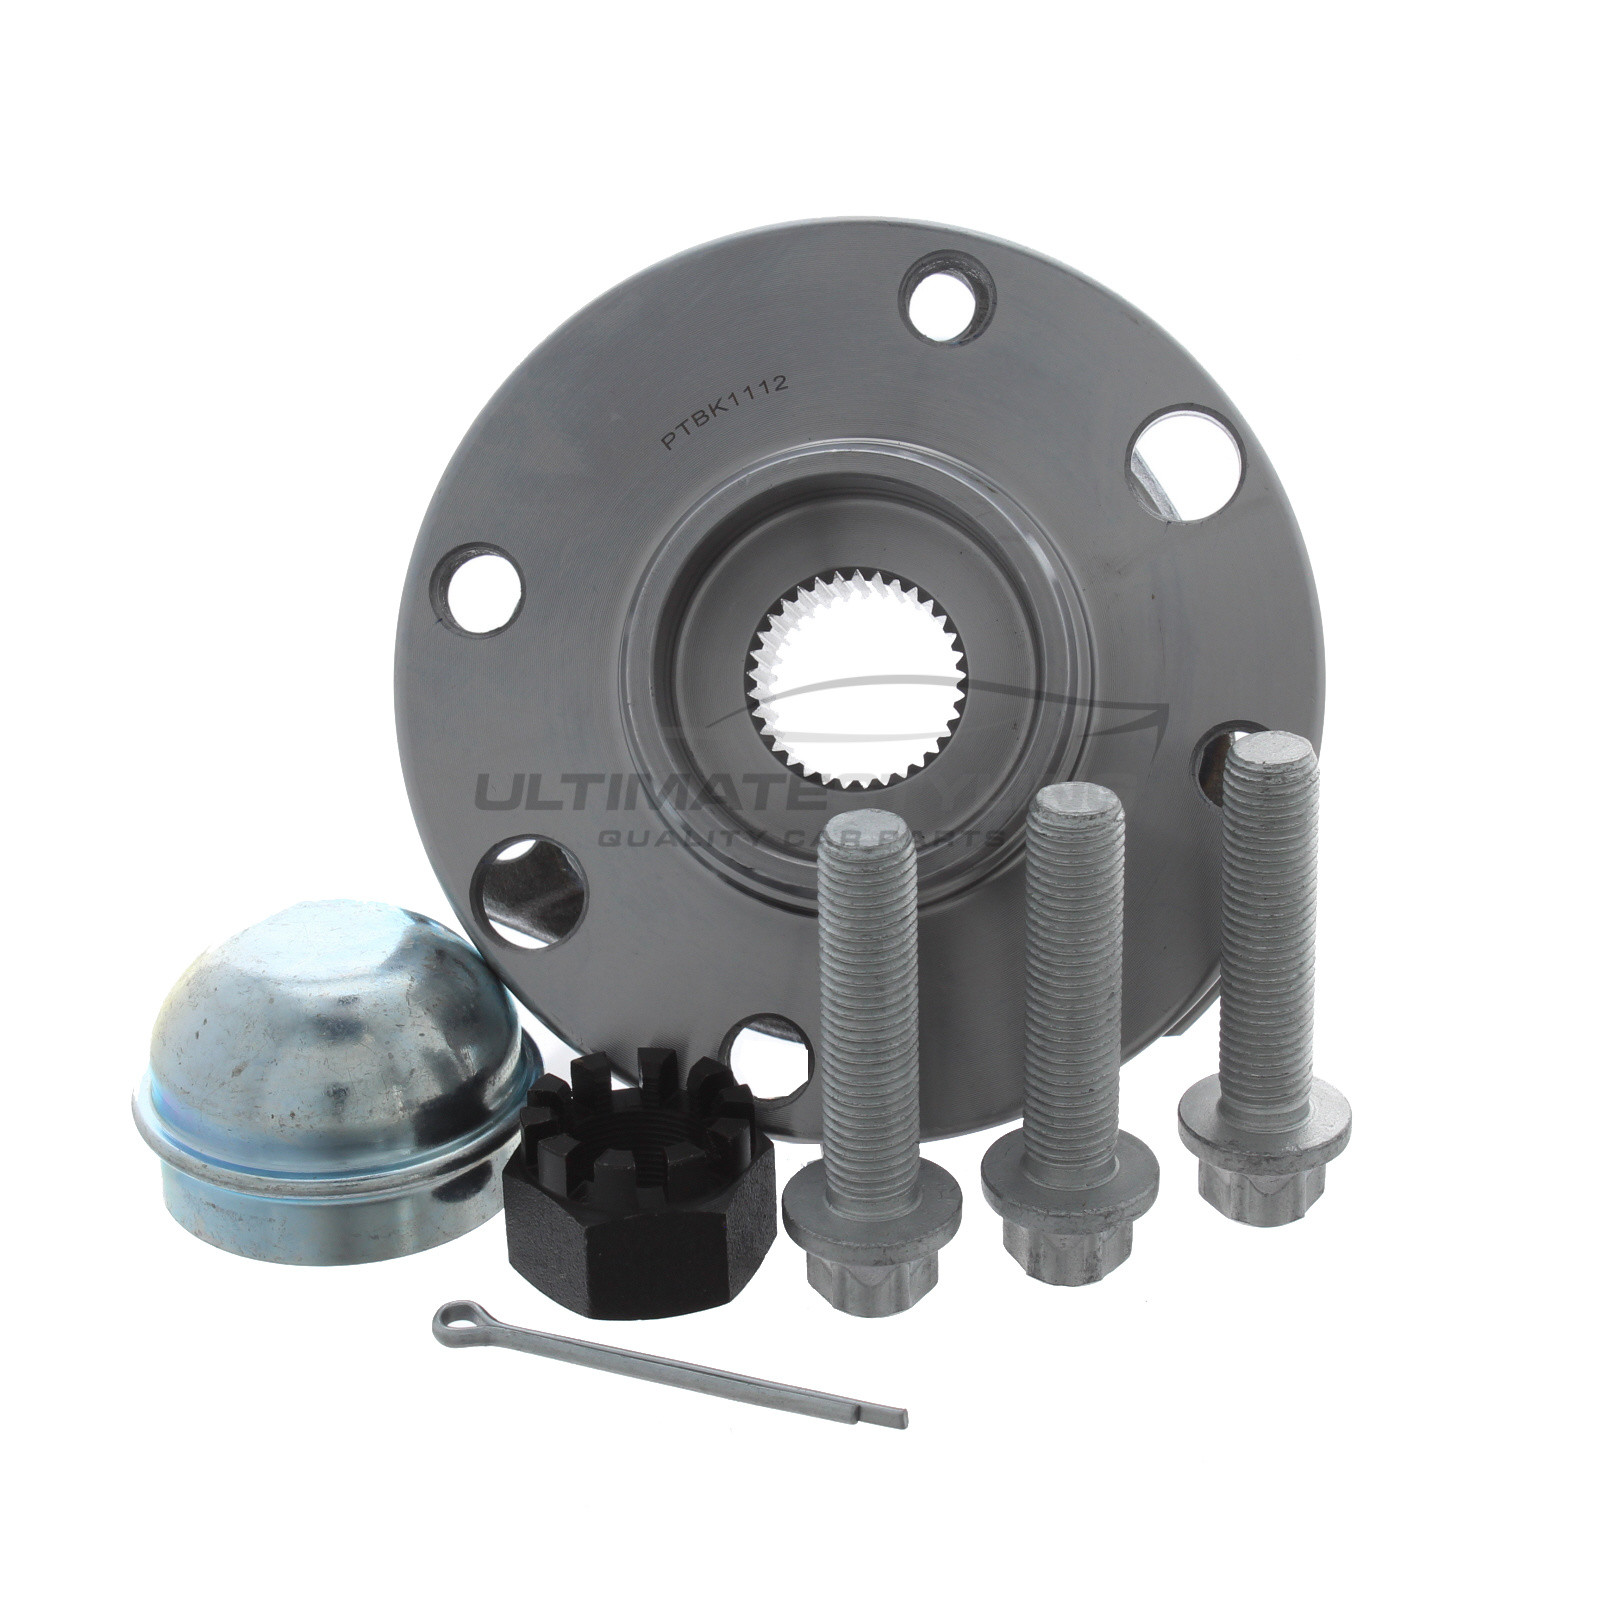 Front <span style="color:red;"><strong>OR</strong></span> Rear Hub Bearing Kit for Lotus Exige